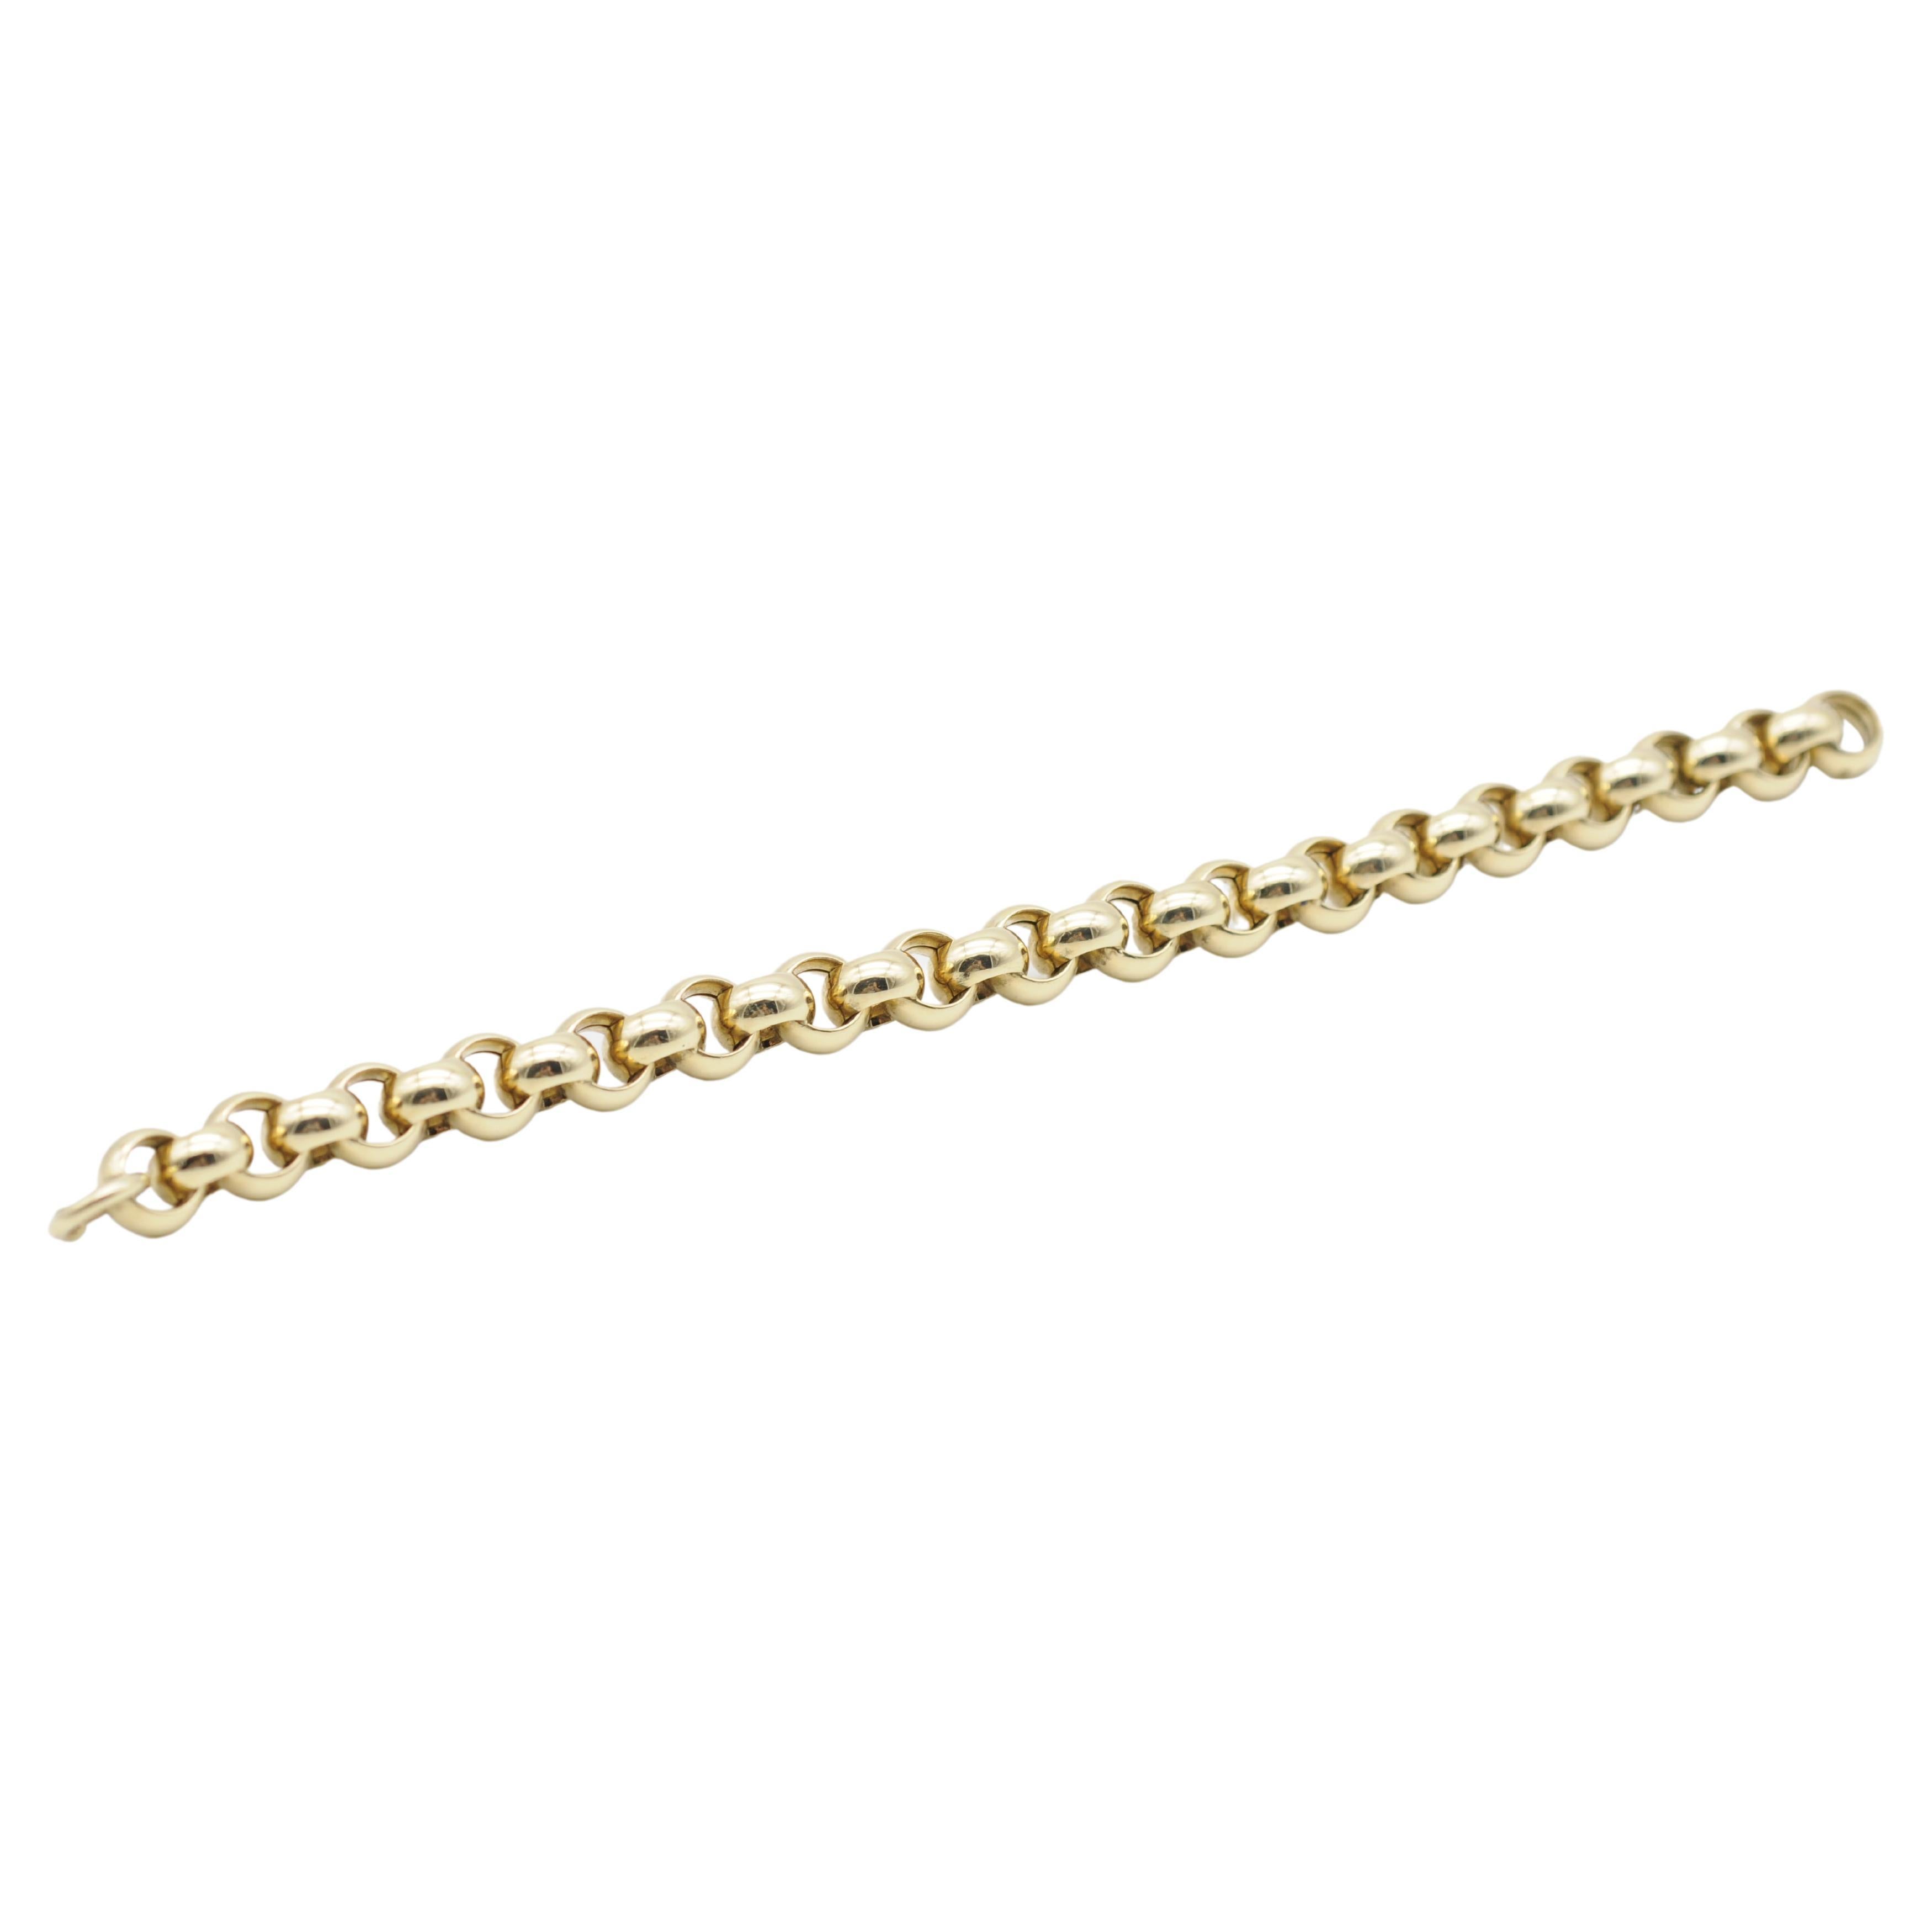 Introducing a truly exquisite piece of jewelry that is sure to turn heads and make a statement - the 14k Yellow Gold Link Bracelet. This stunning bracelet boasts a thick and luxurious design that exudes an air of sophistication and